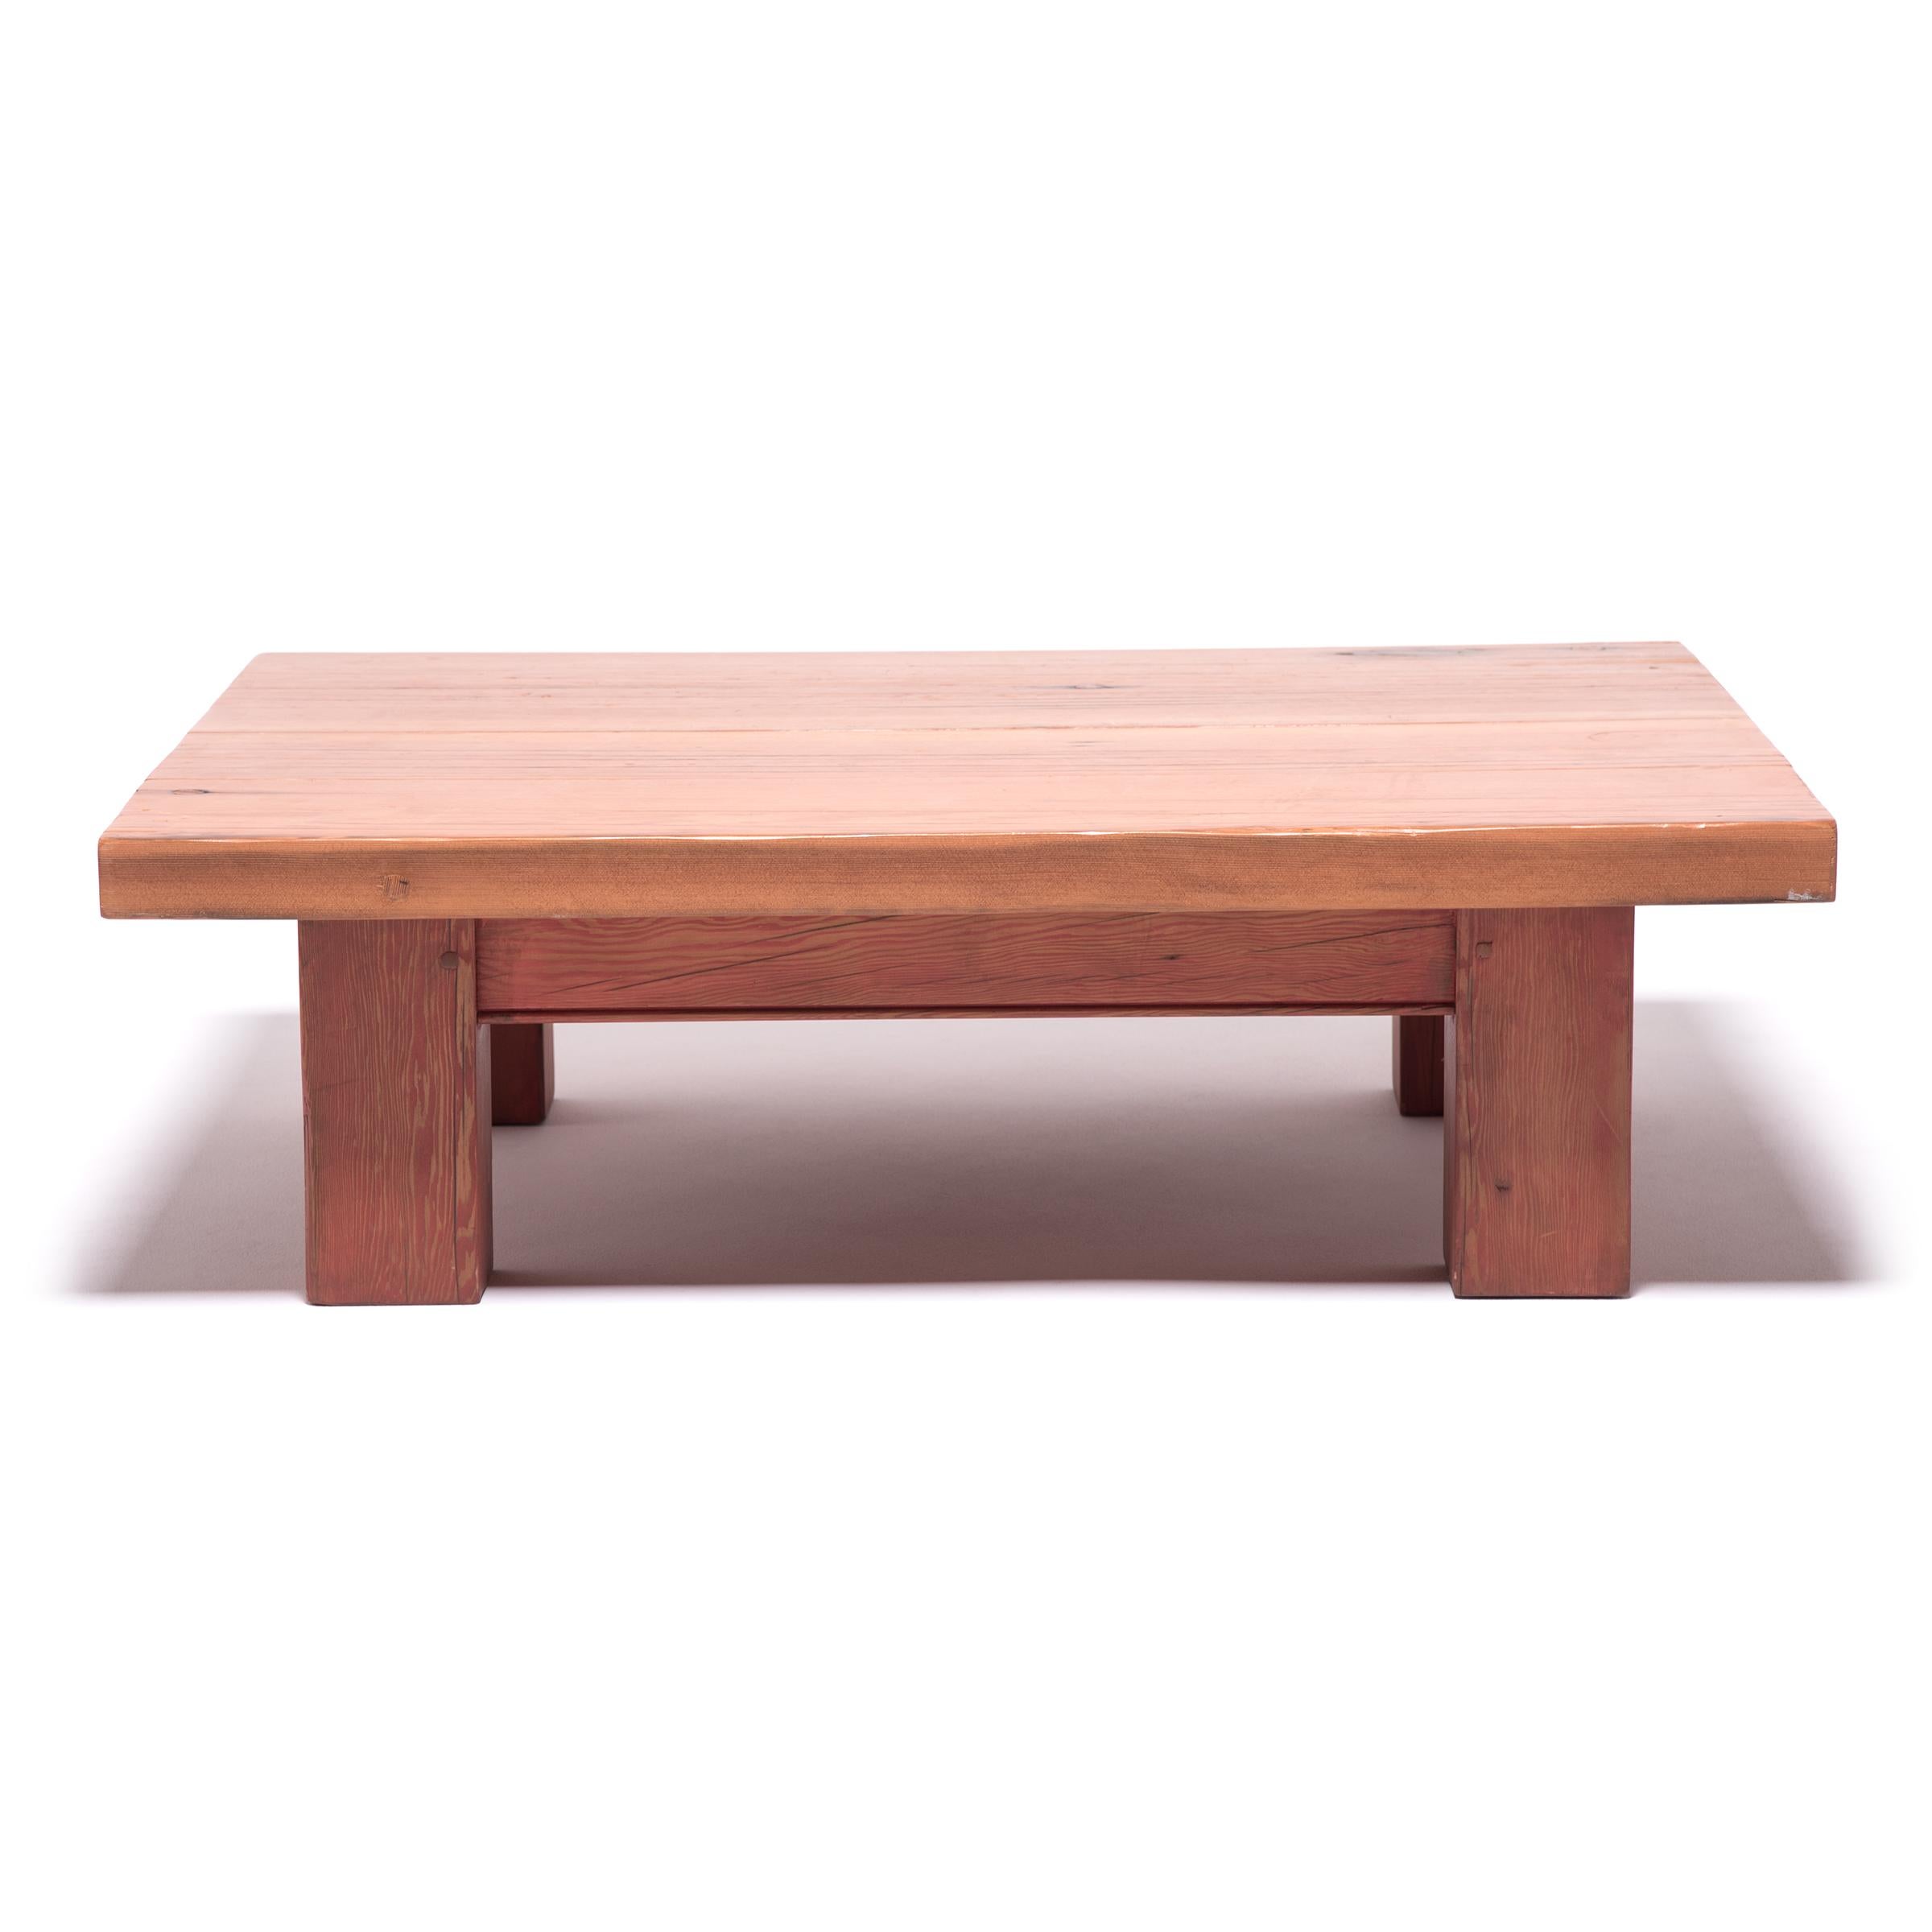 American Plank Top Low Table